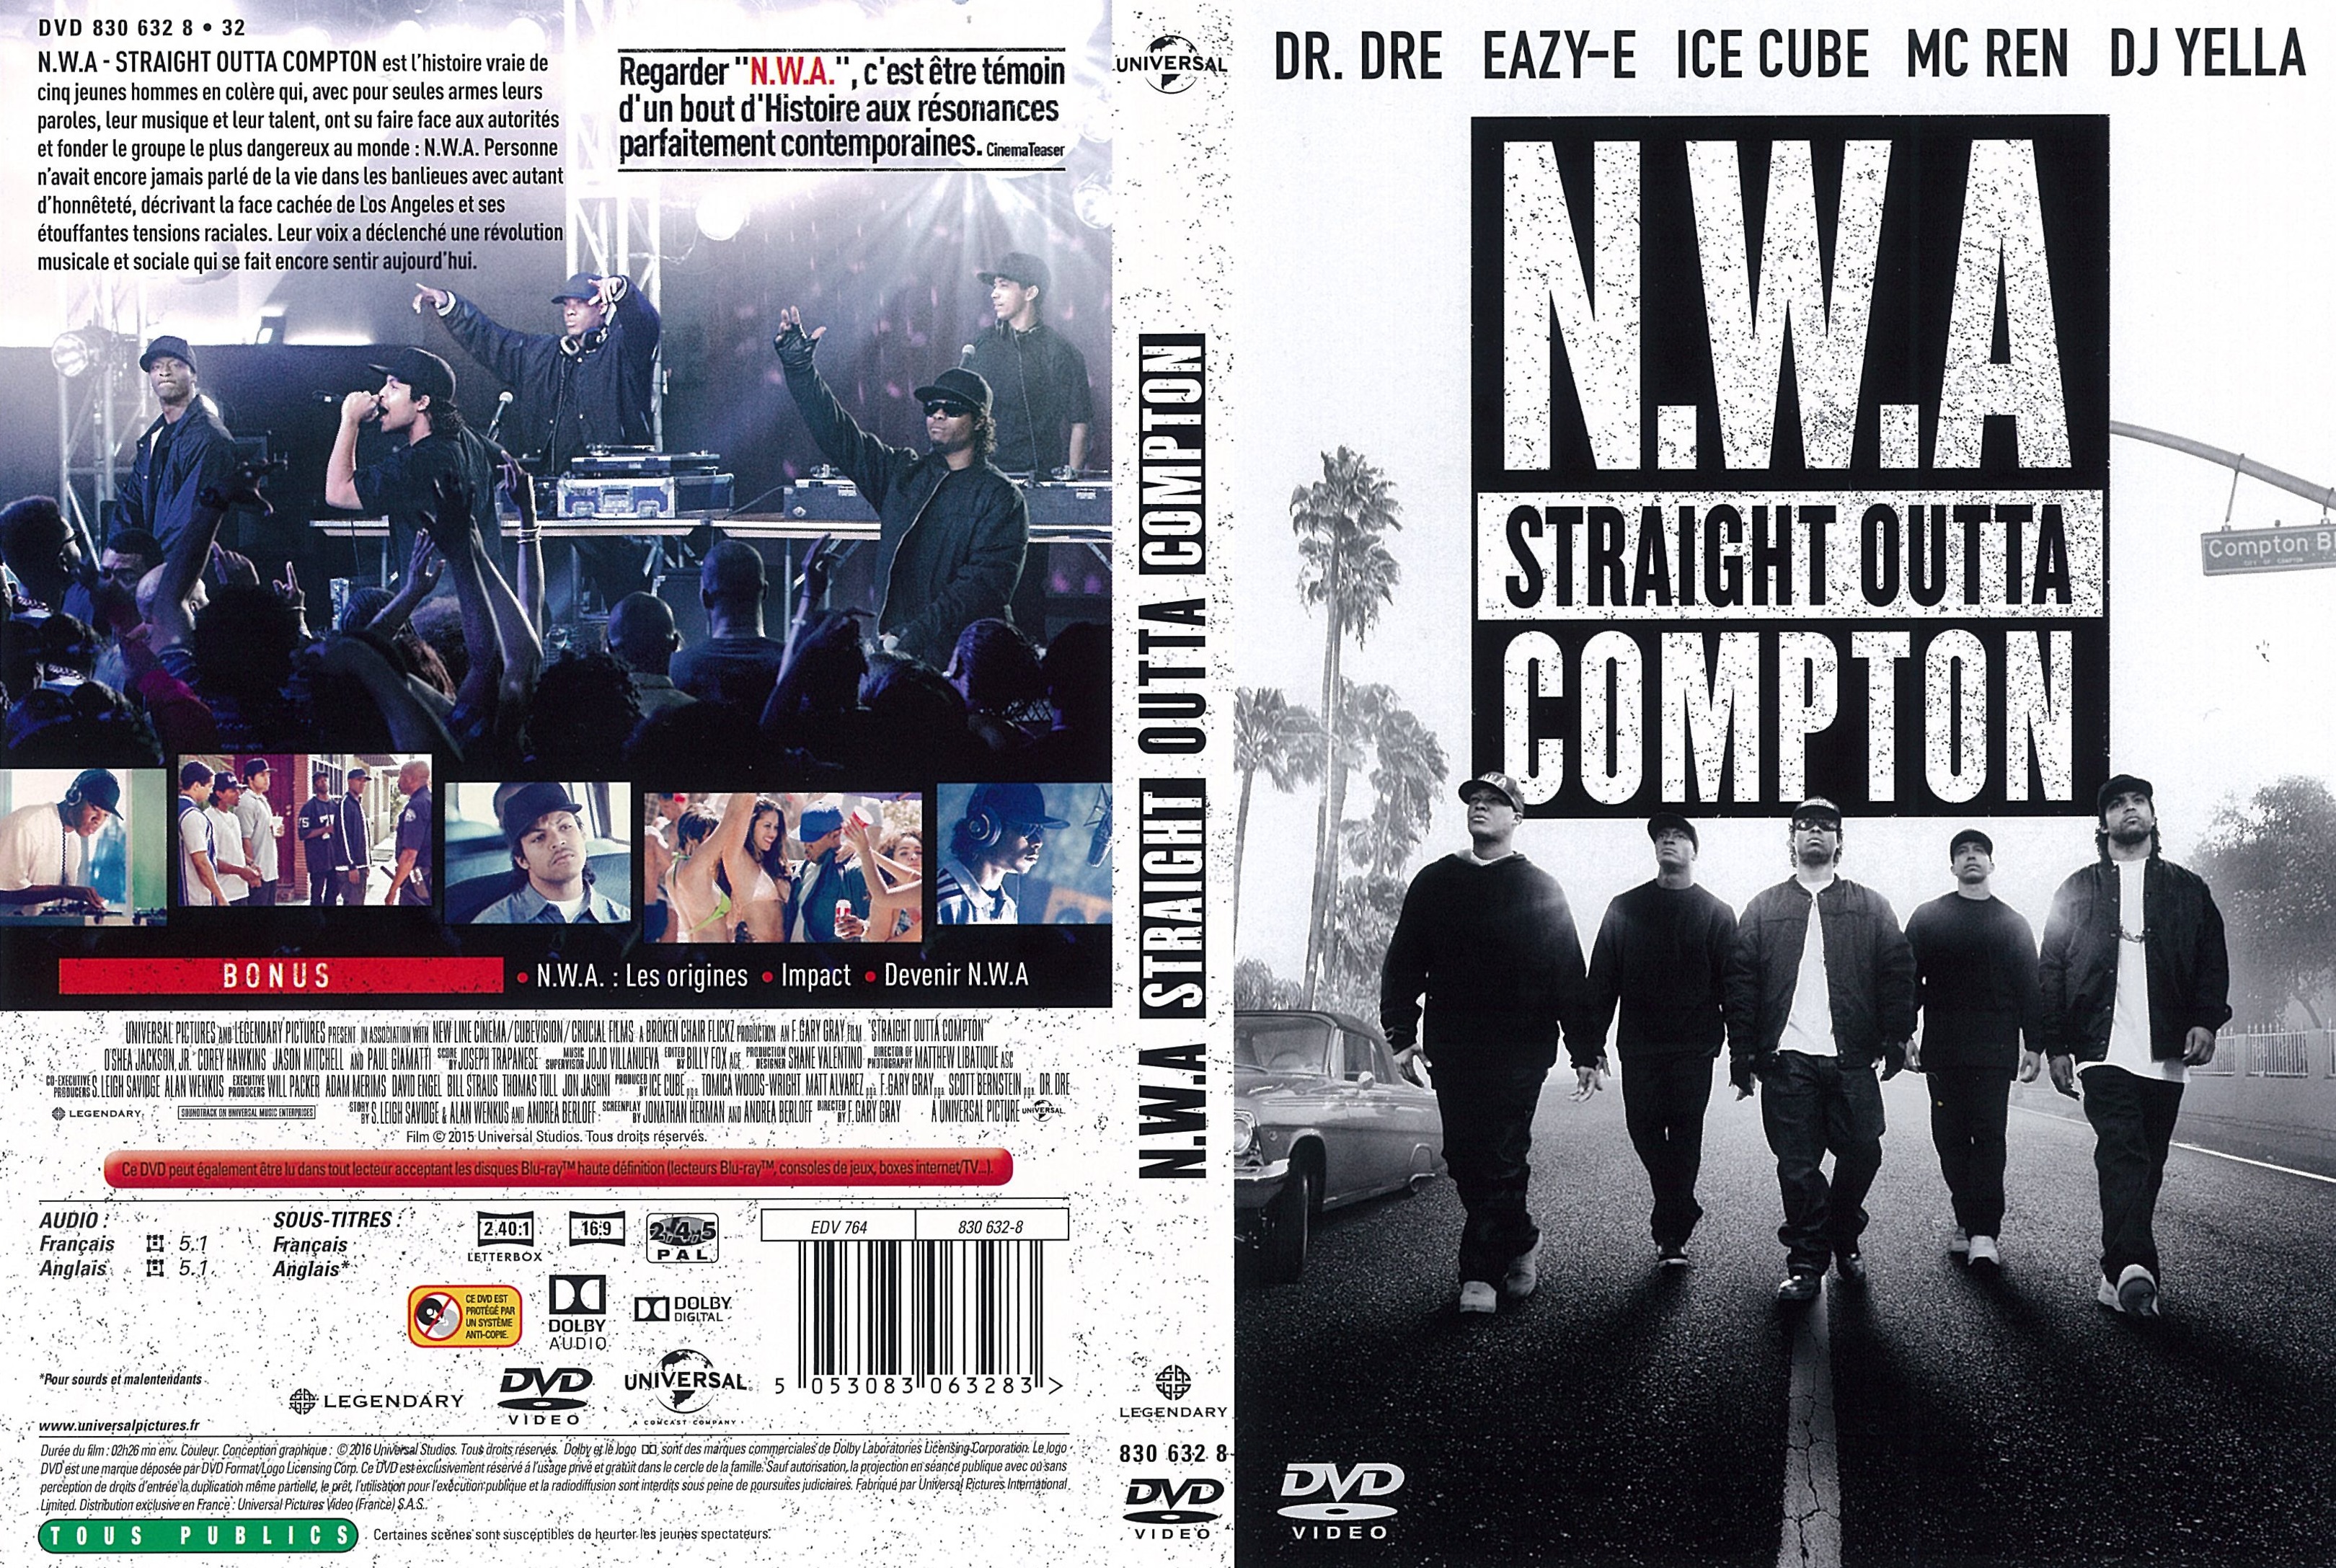 Jaquette DVD N.W.A Straight Outta Compton